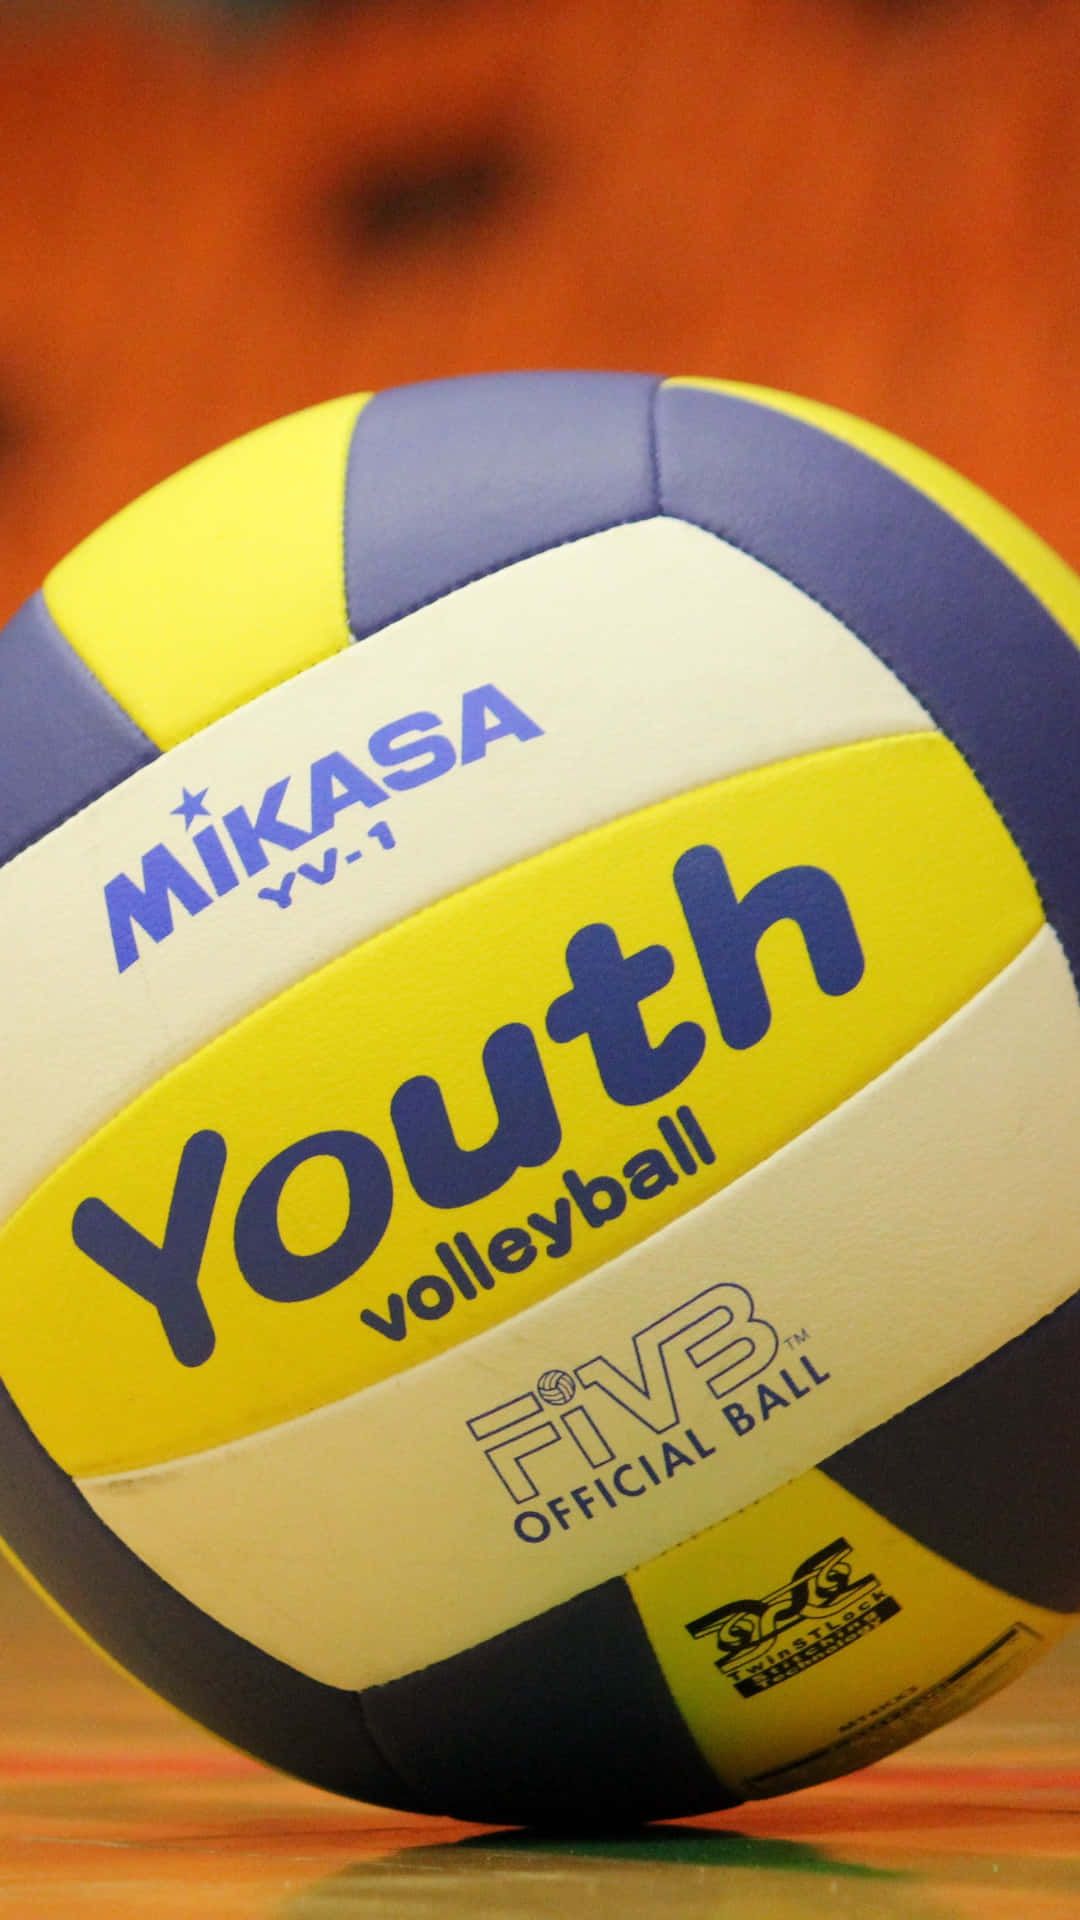 A Mikasa youth volleyball on a wooden floor. - Volleyball